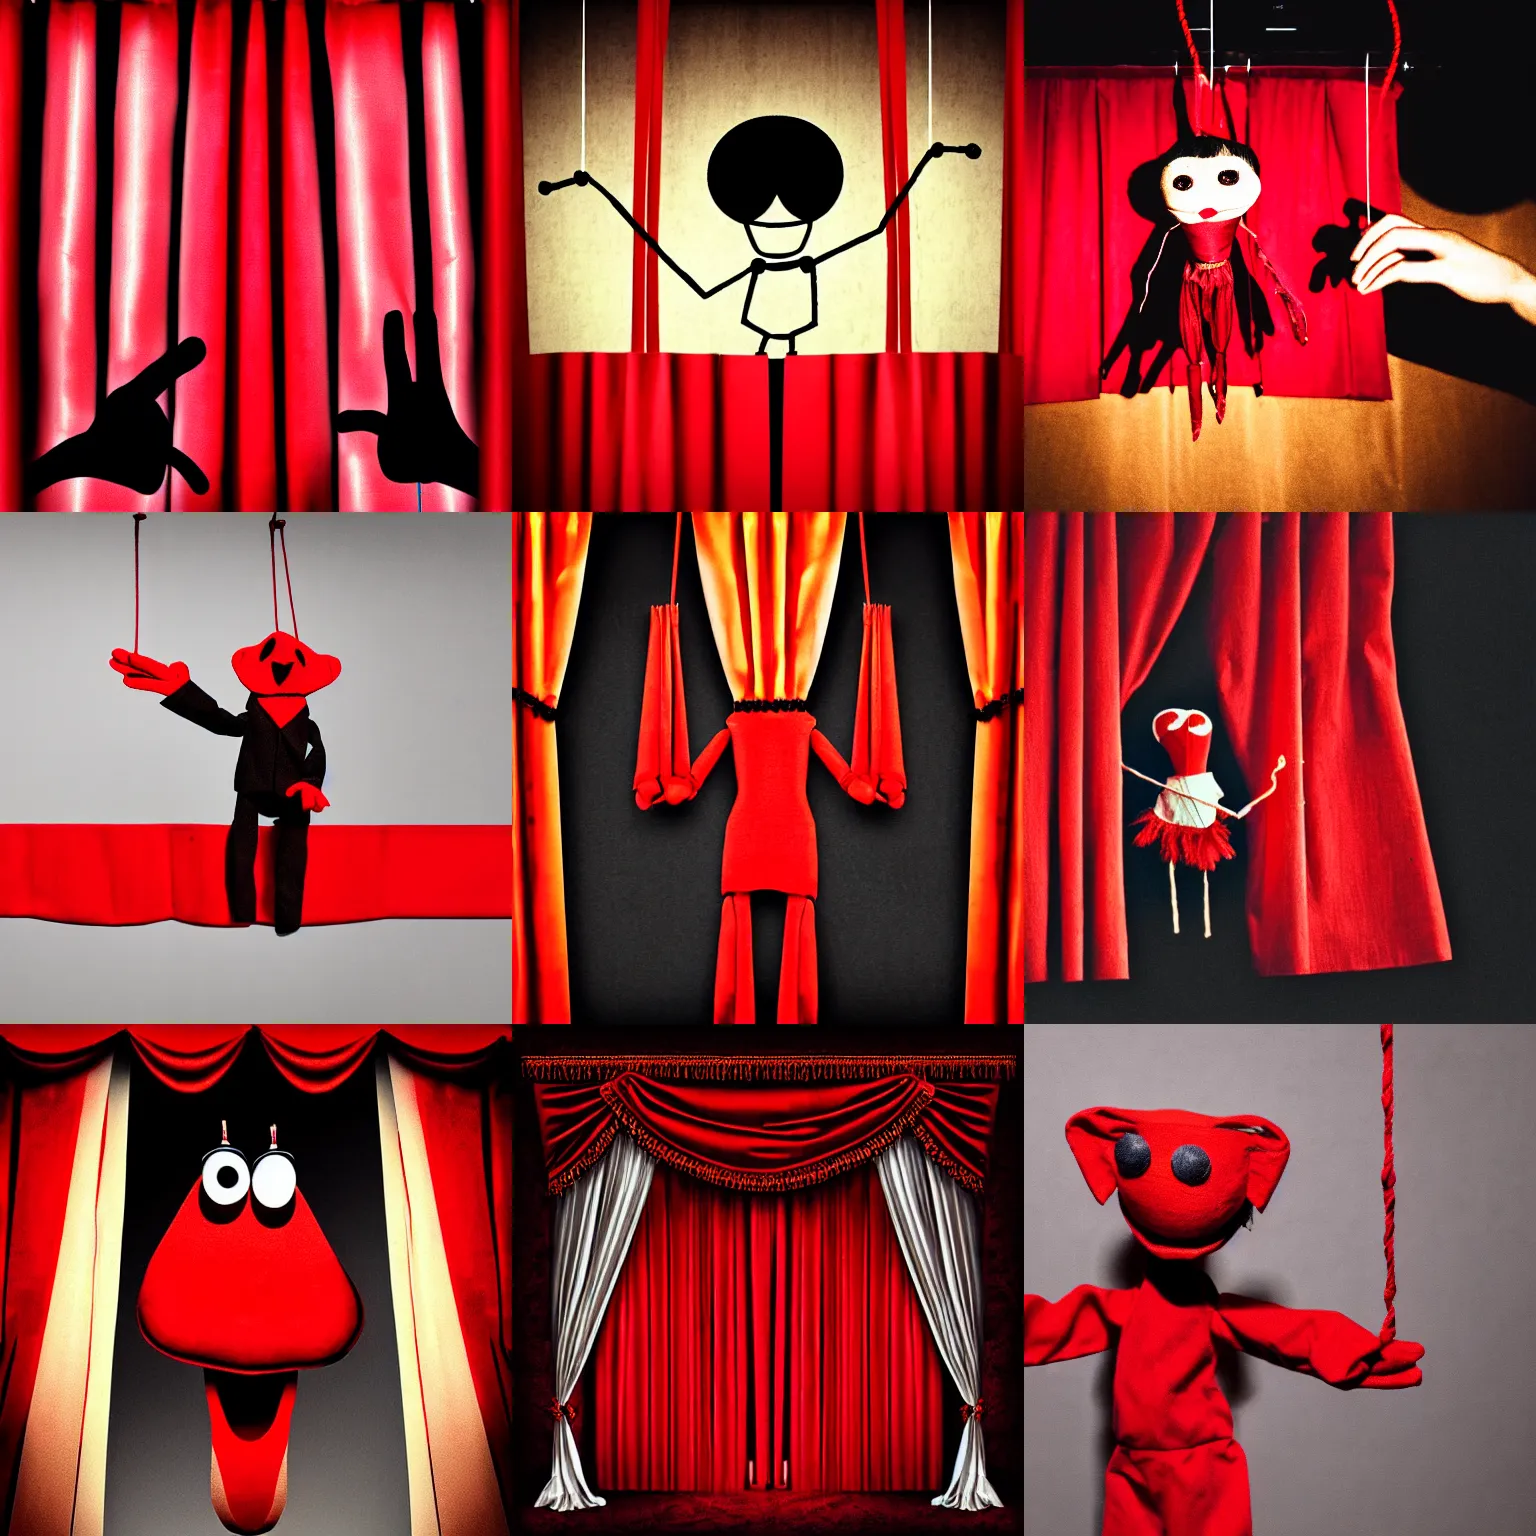 Prompt: puppet on strings behind red curtains, hand puppet strings, dark ambiance, realism,an album cover